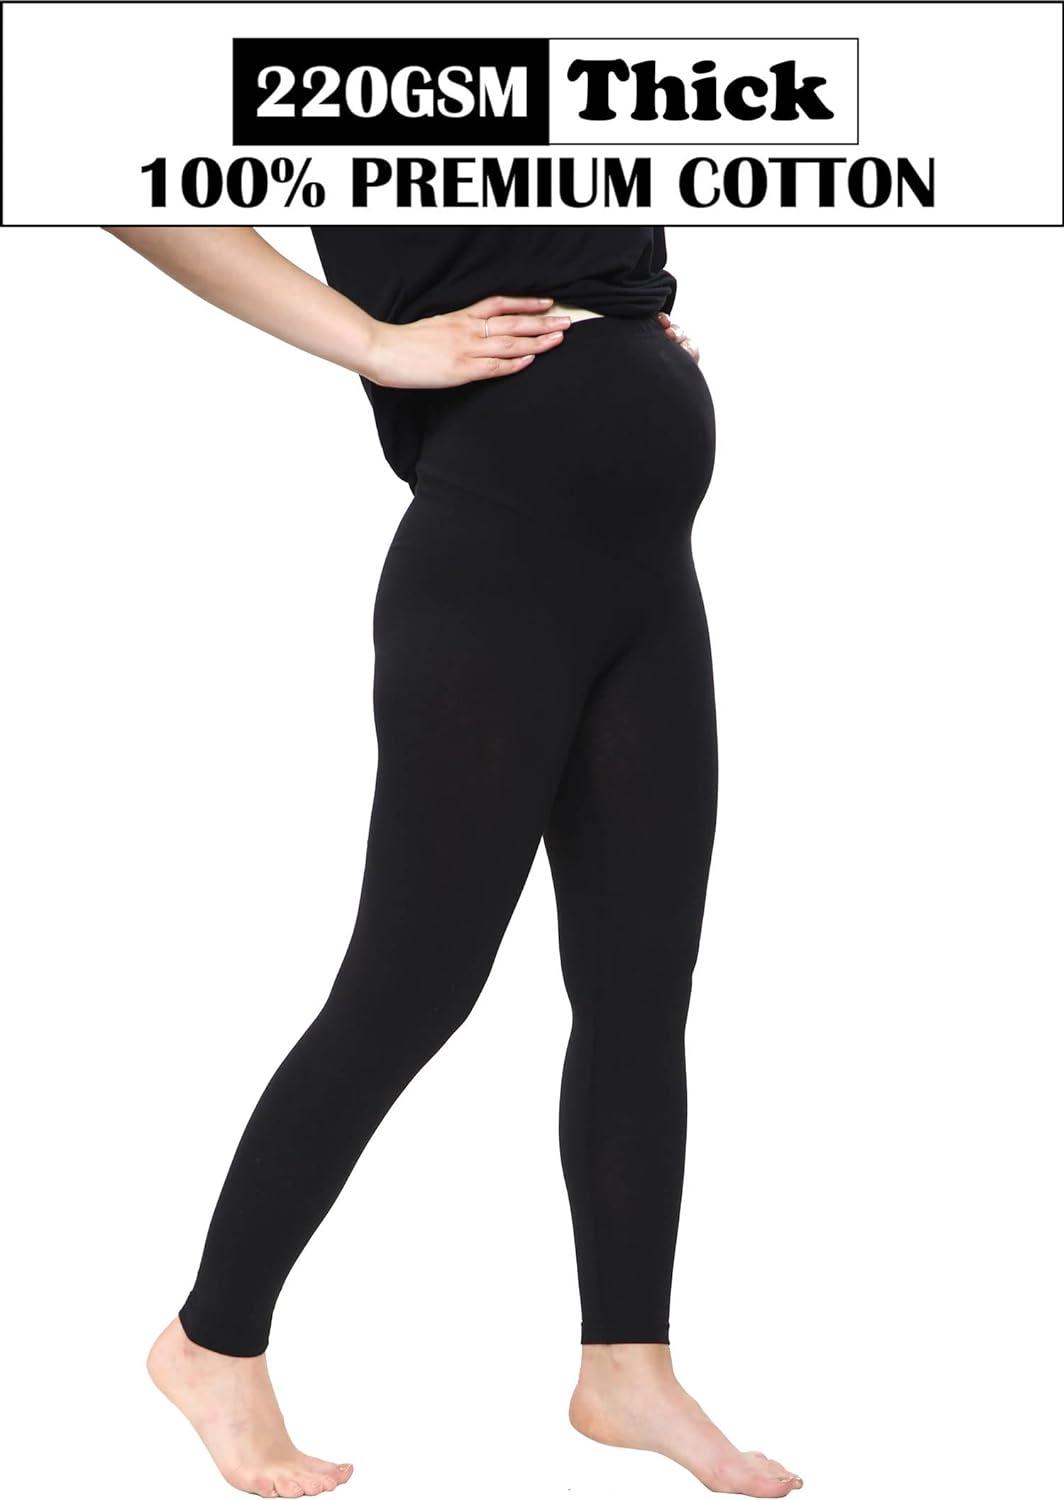 YAHOMI Womens Ladies Maternity Over Bump Stretchy Adjustable Full Ankle  Length Soft Cotton Leggings Size 8 to 20 14 Black